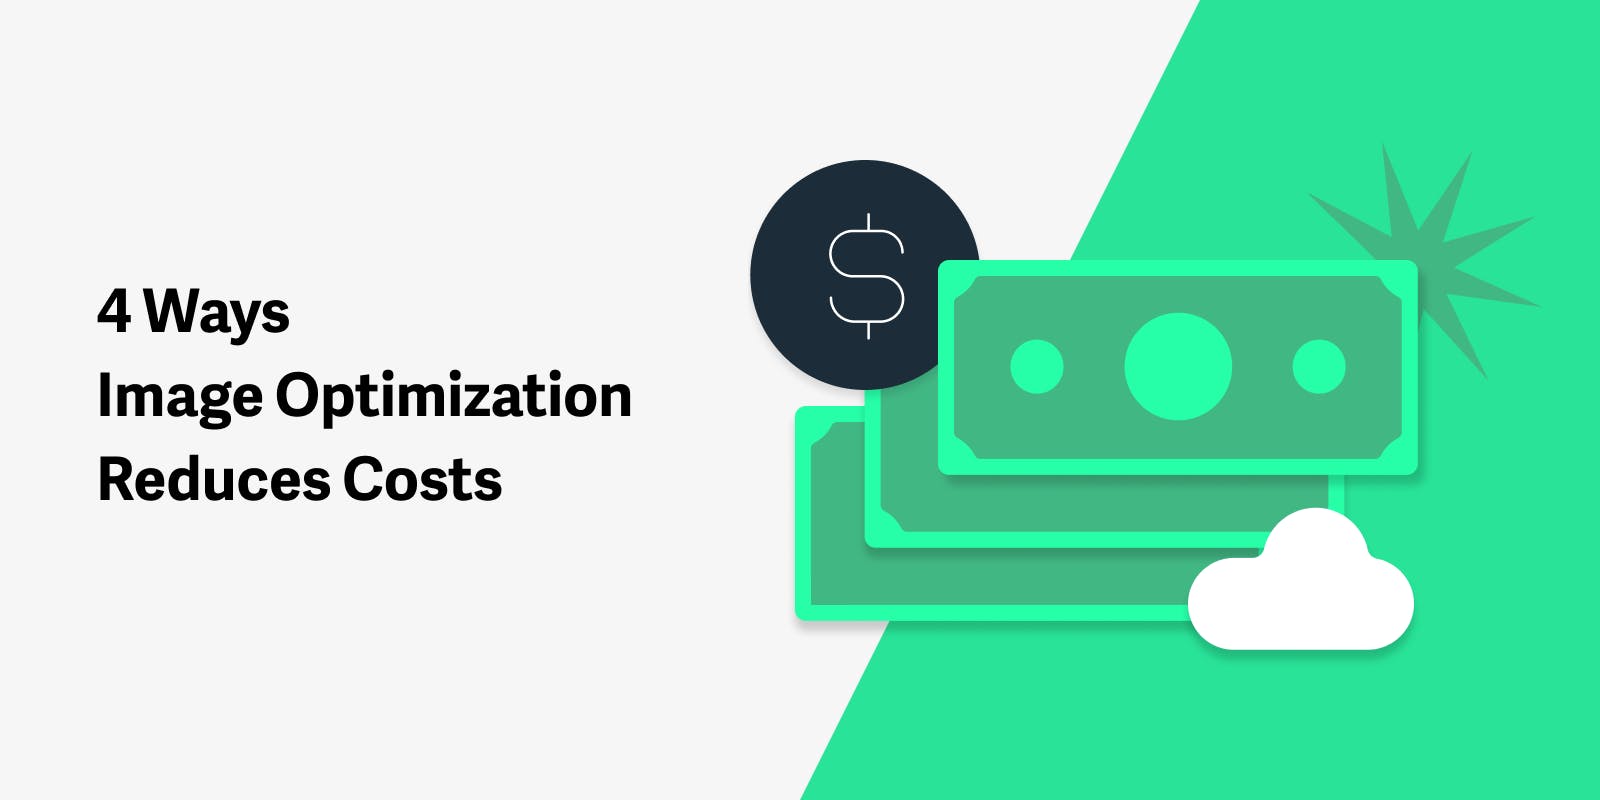 Image optimization tools reduce costs by decreasing bandwidth consumption, cutting storage costs, and saving time. Furthermore, they can increase your revenue by improving page speed, SEO, and conversion rate. Check out this article to see how you can improve cost-savings and ROI.